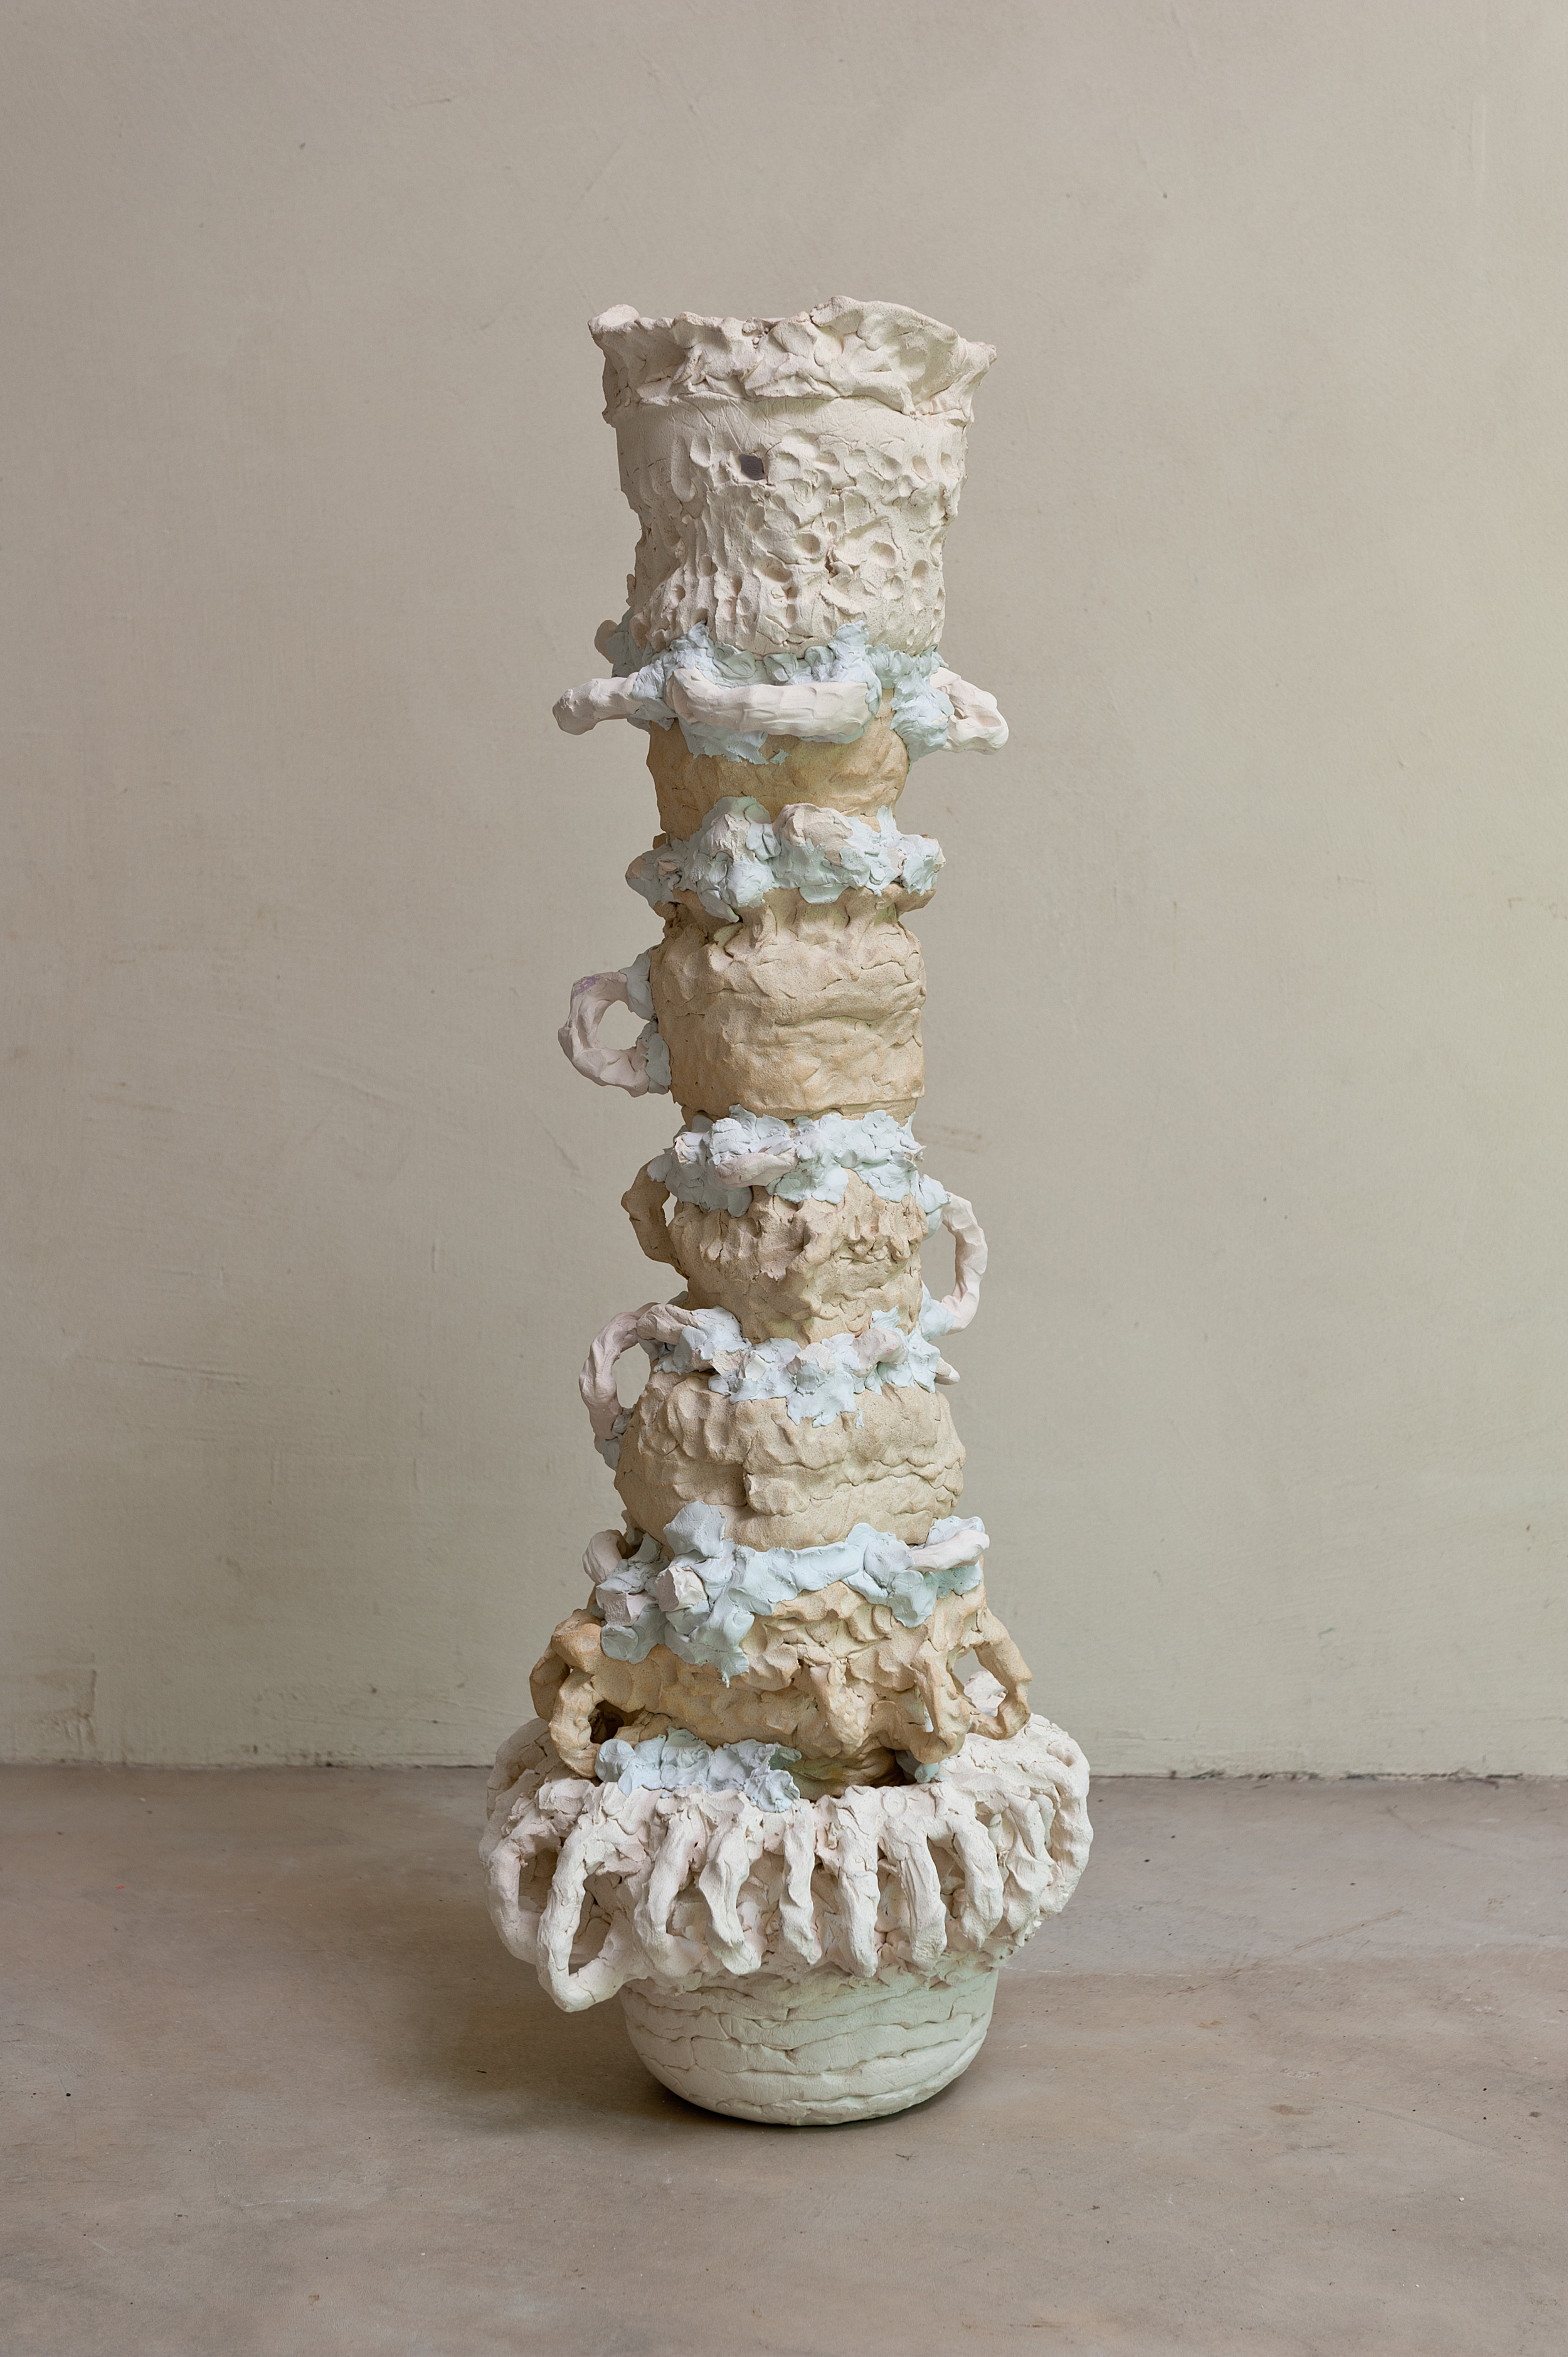  Beverly Semmes,  Stacked Pot#4 , 2015 